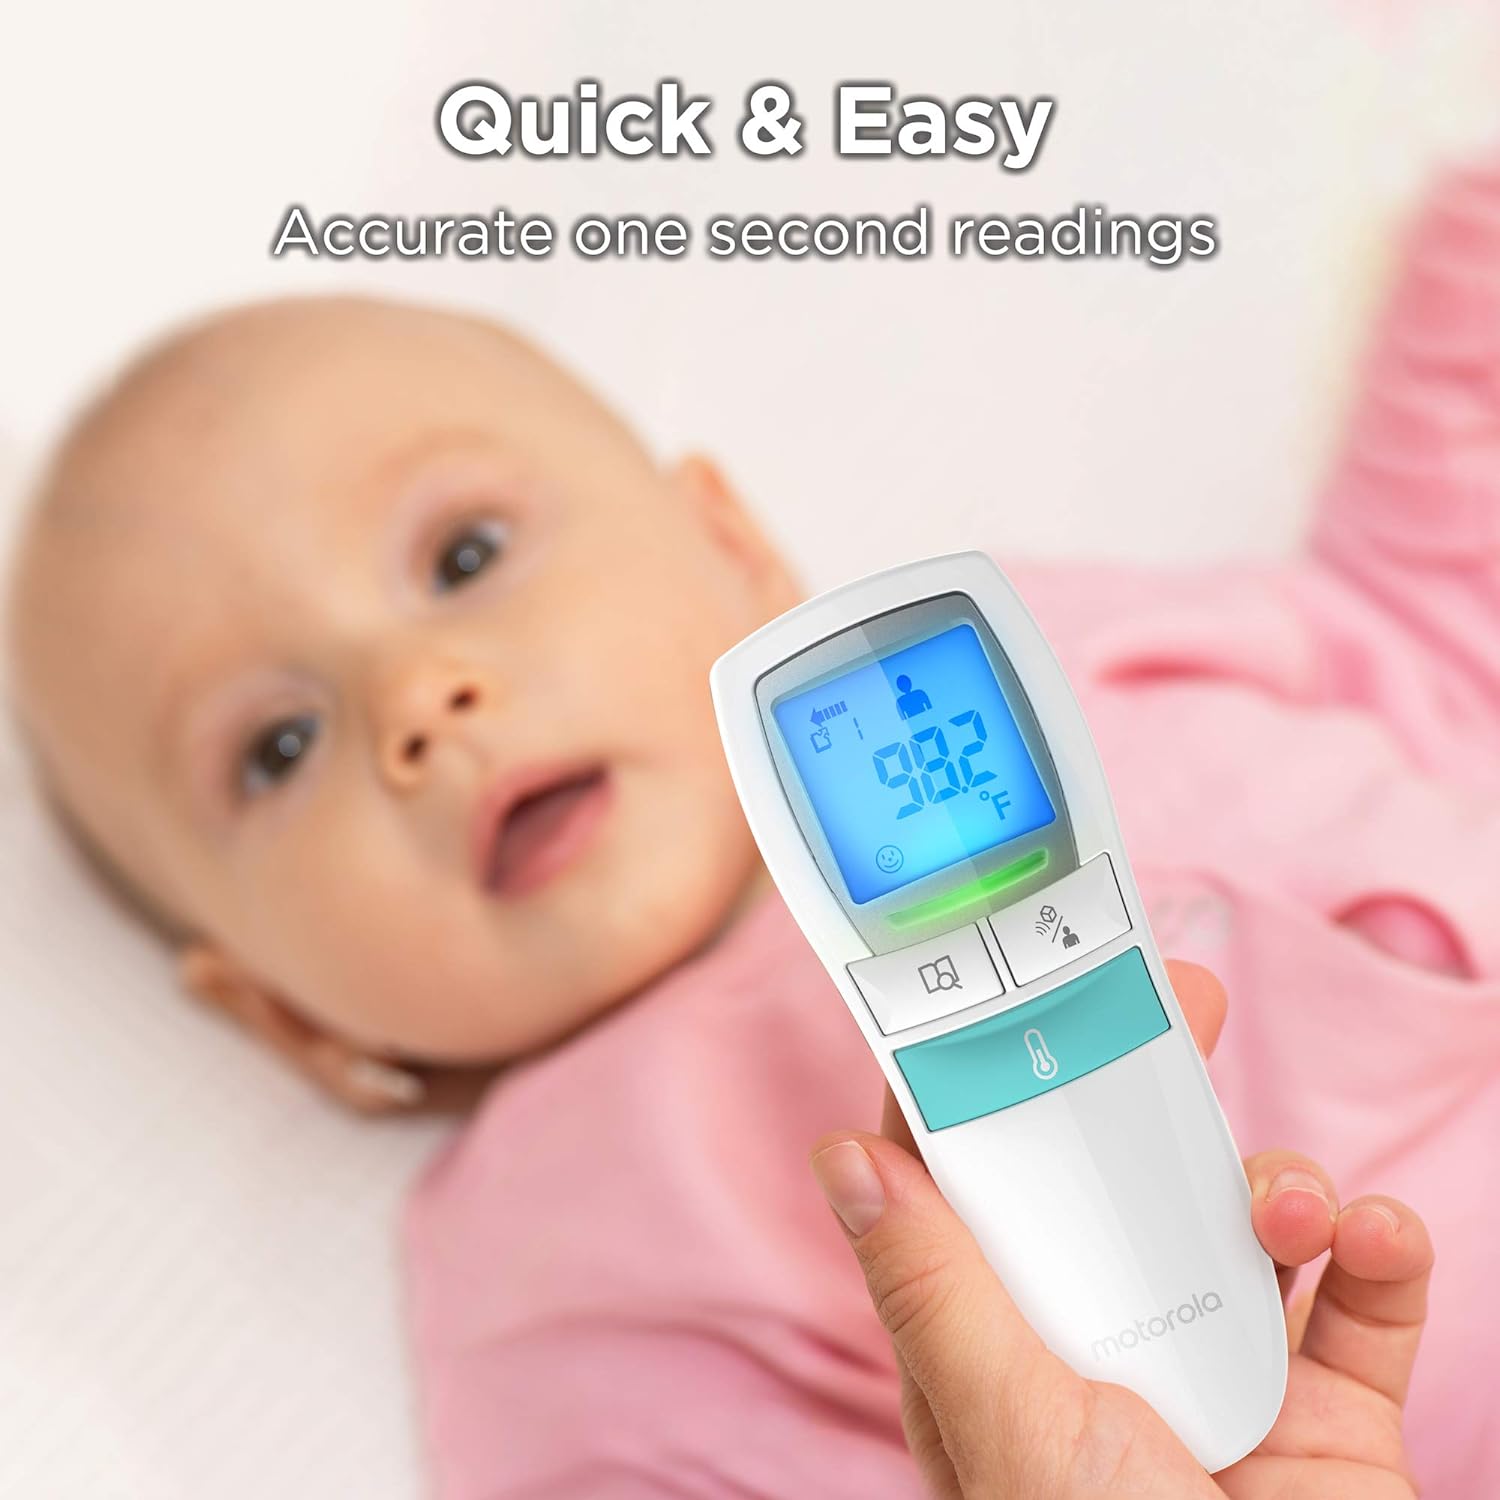 Motorola Care 3-in-1 Non-Contact Baby Forehead Thermometer - Body, Food or Liquid Temperature, Handheld Clinical Device for Kids, Adults - No Touch, Quick & Accurate Reader-Large Display, White : Baby